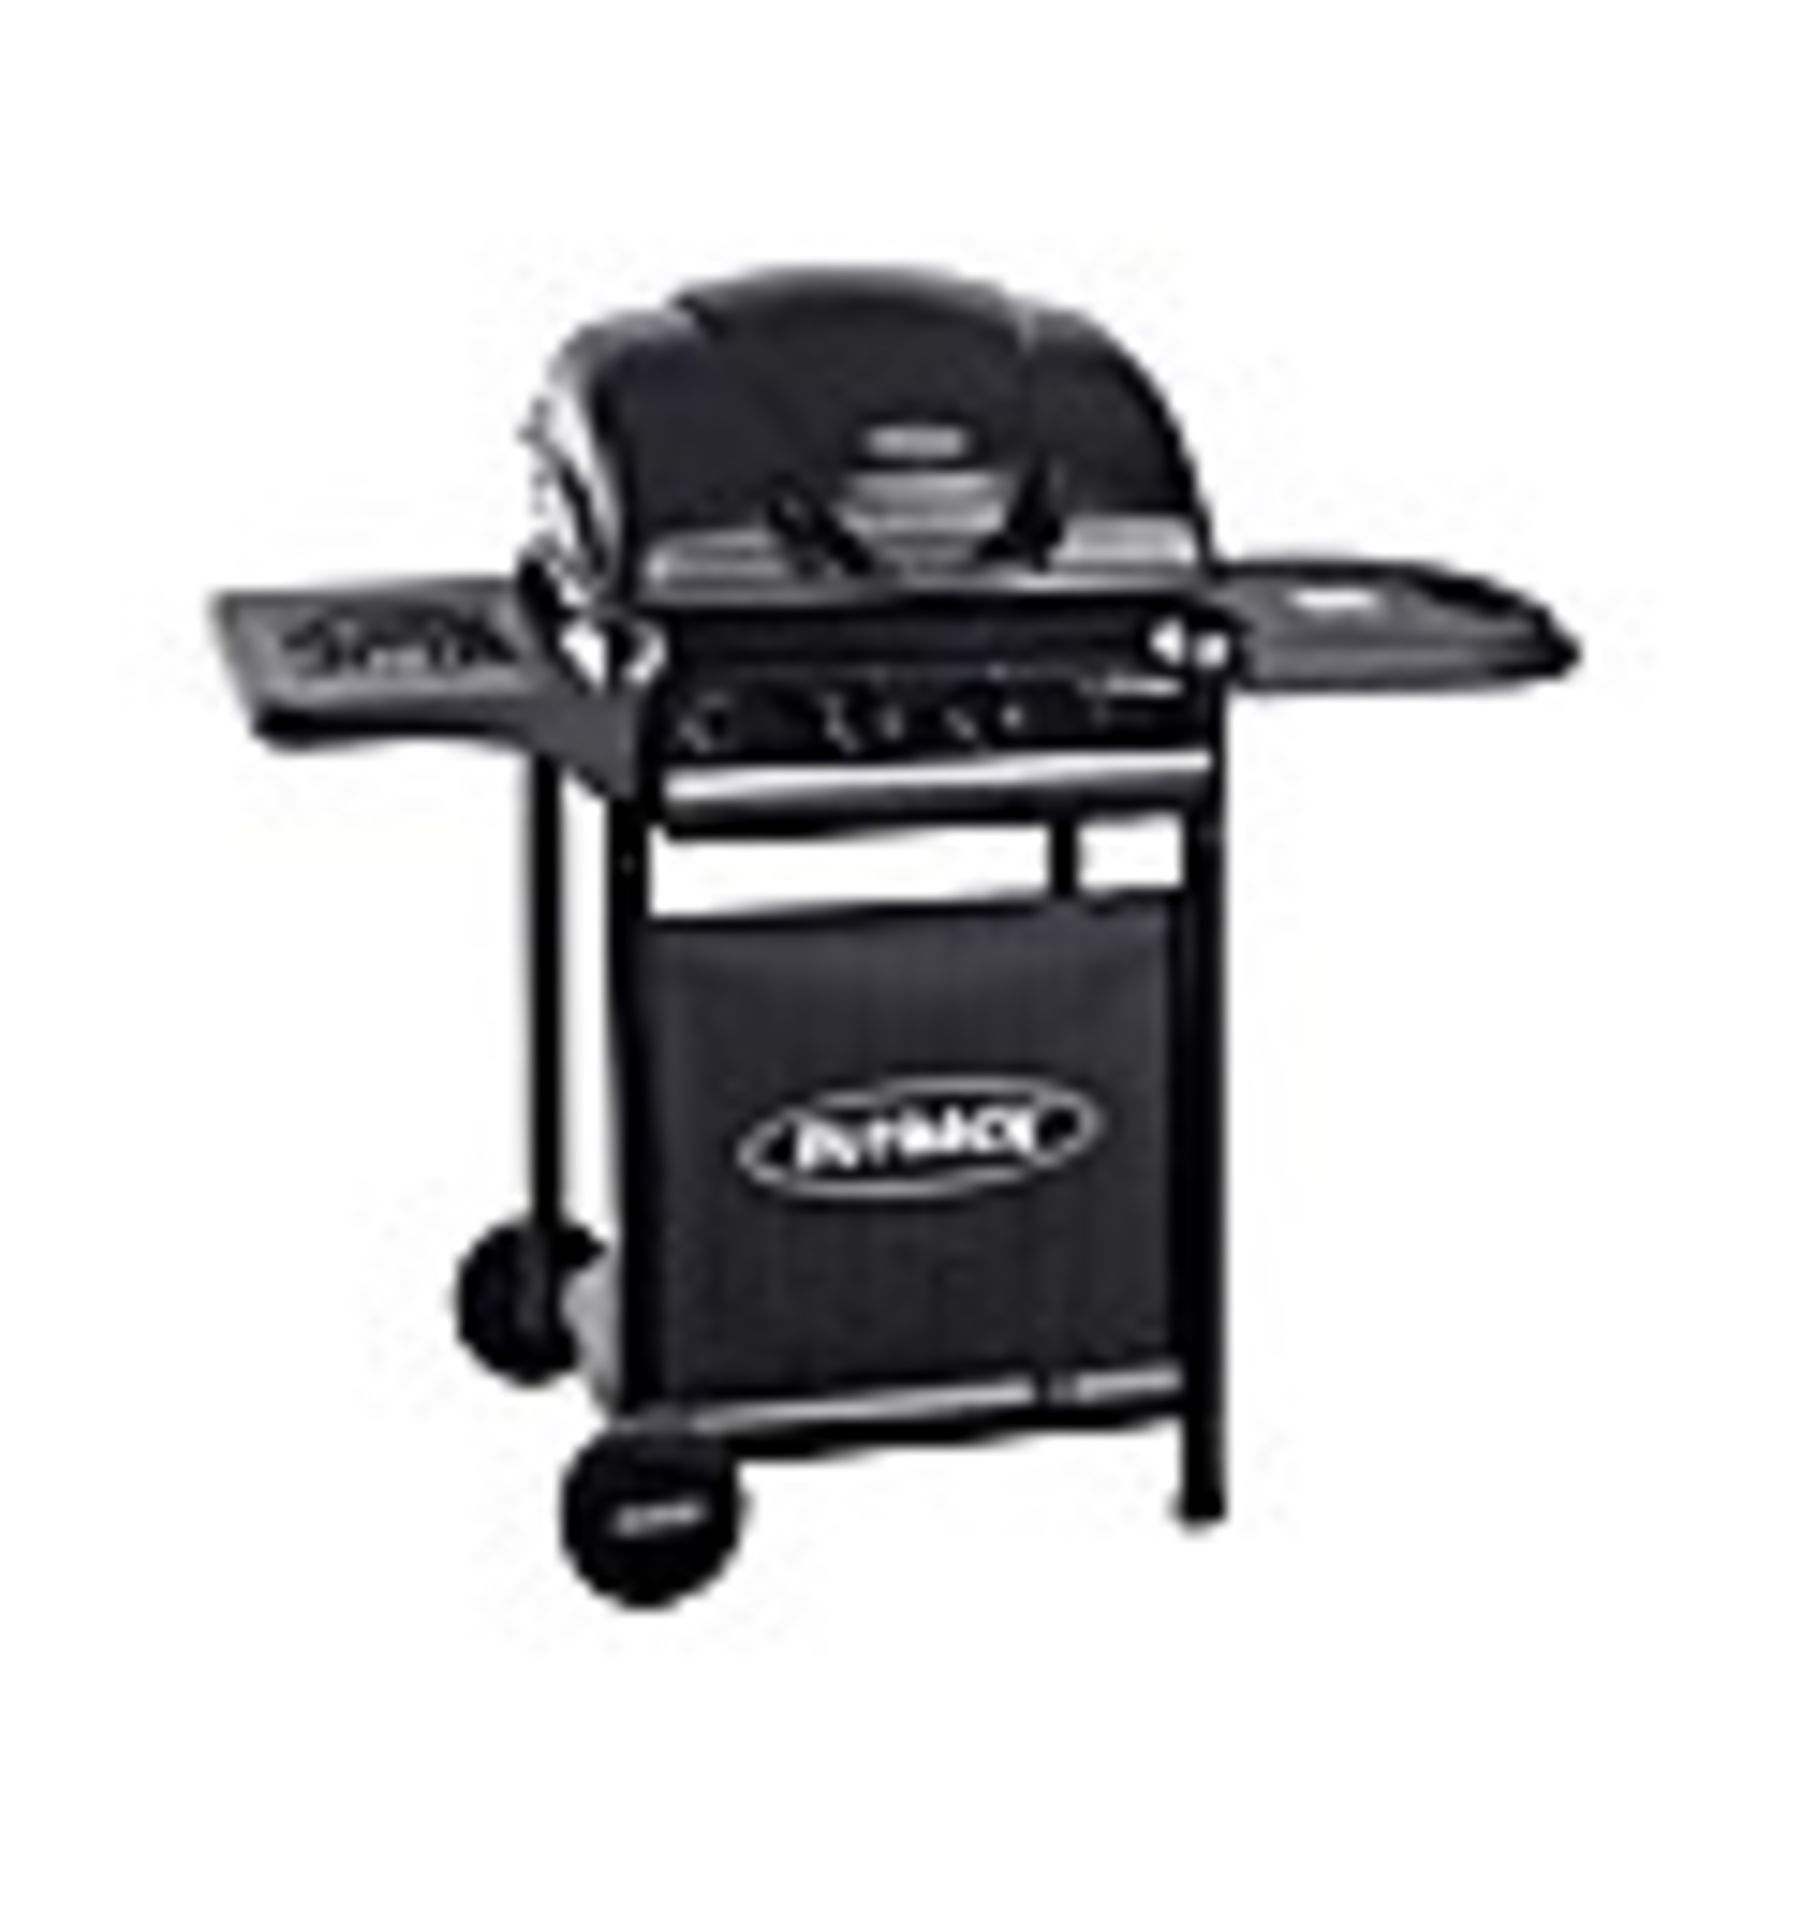 (REF117936) Outback Omega 250 Gas Barbecue with Warming Rack RRP £ 379.98